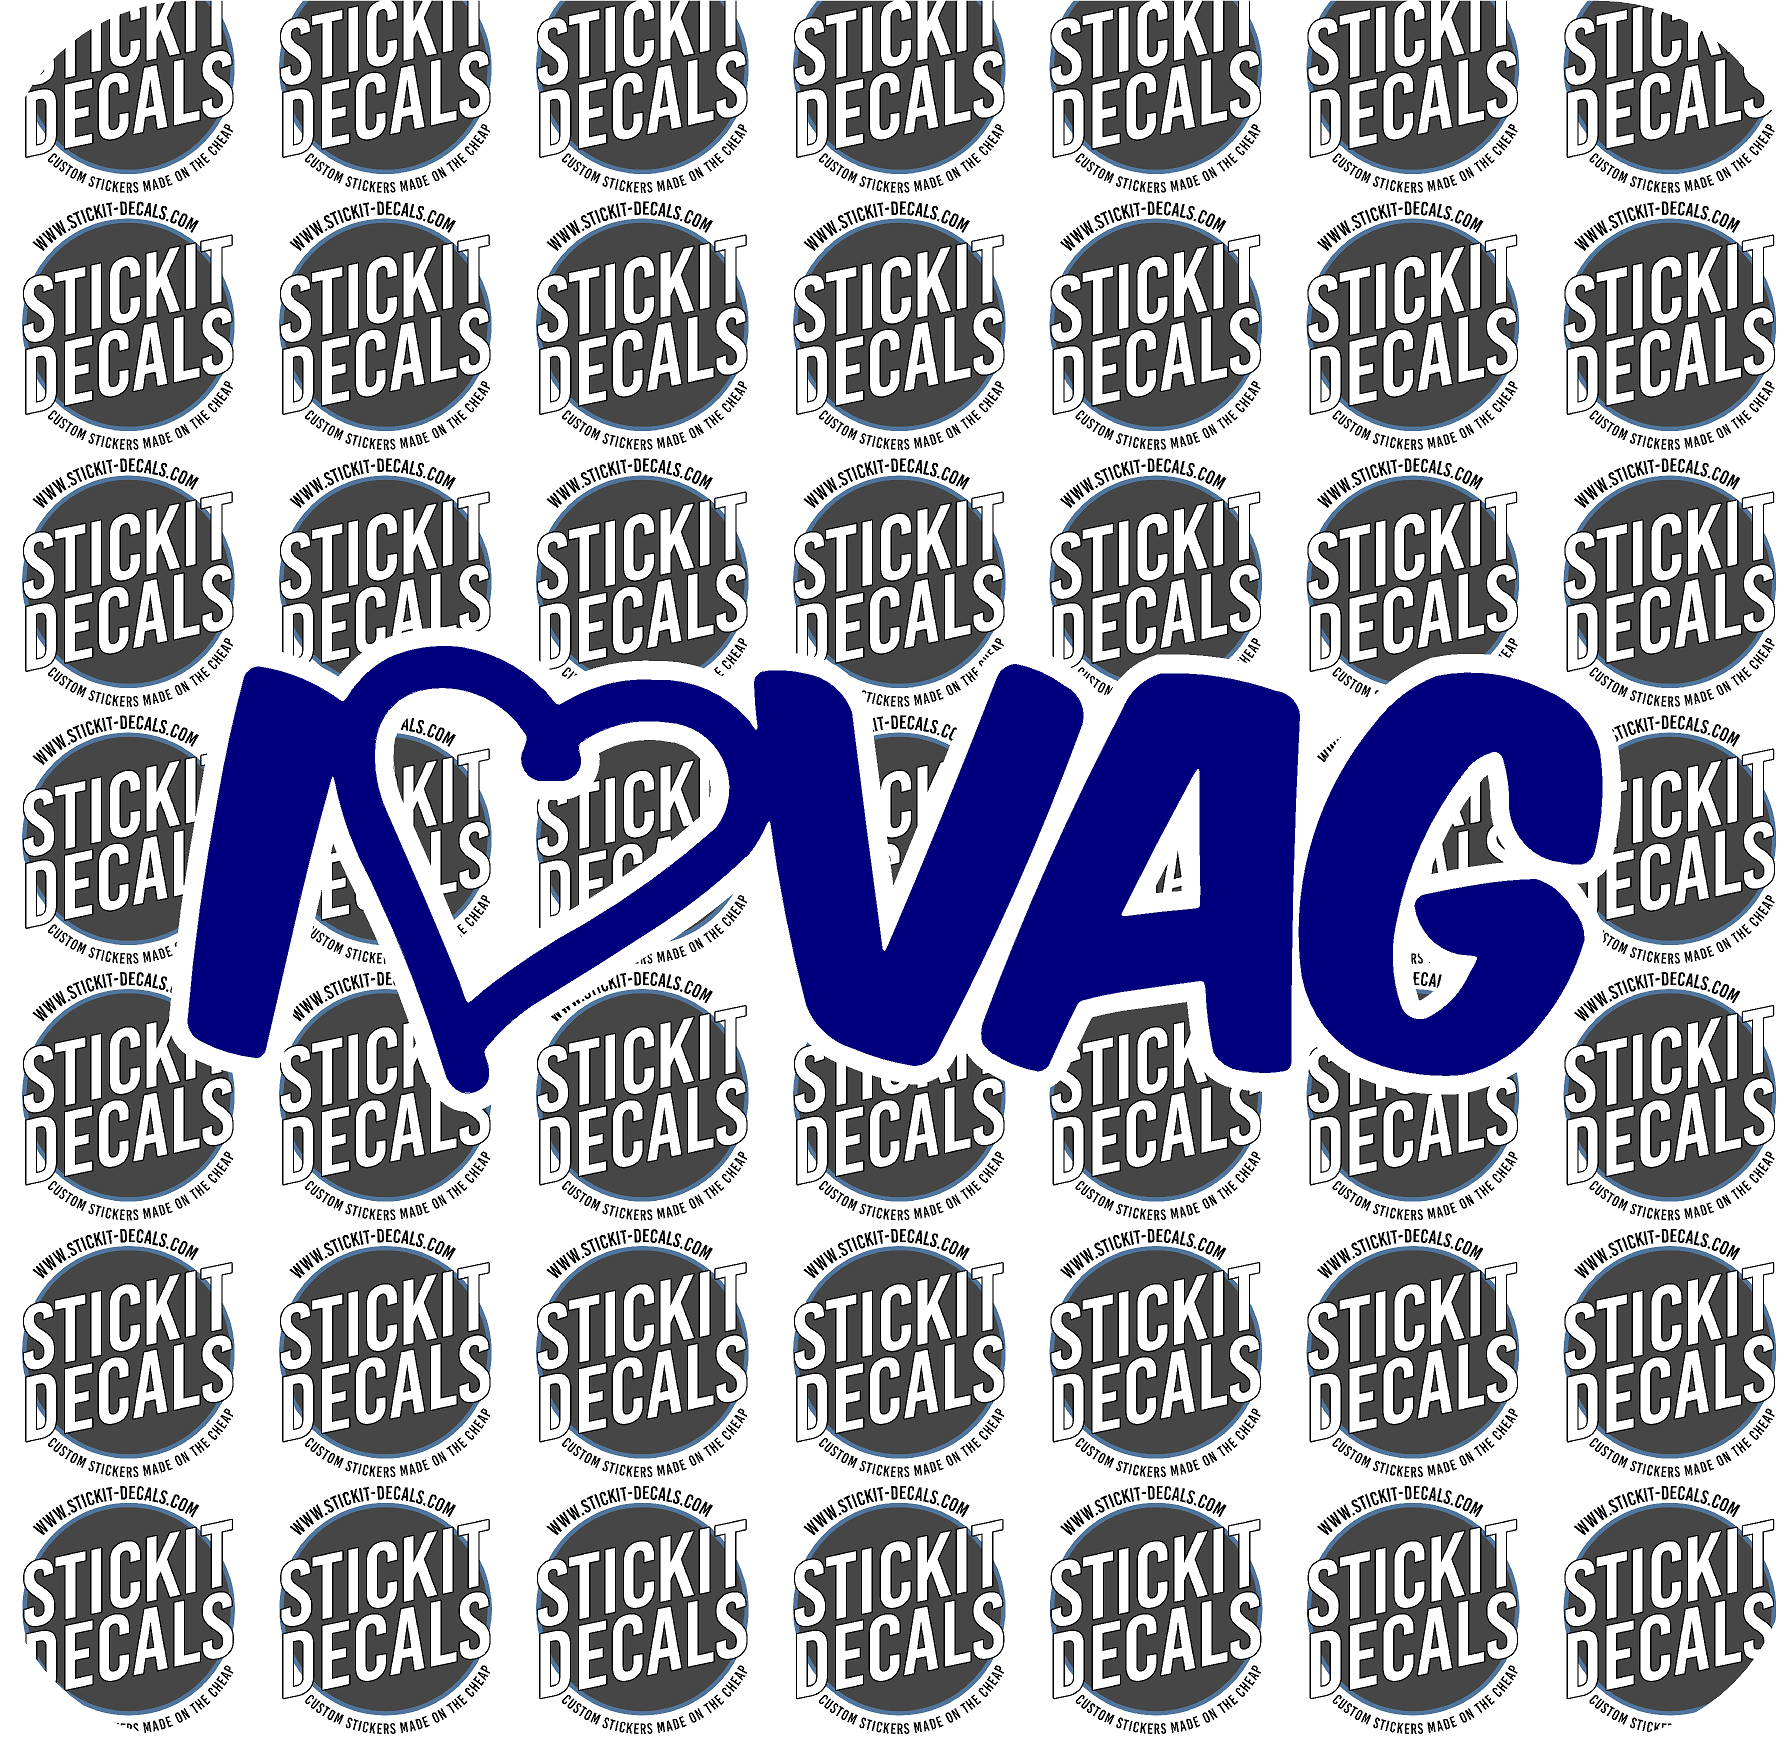 I ♥ VAG Decal Sticker – Volkswagen Auto Group VWAG VW – Stickit Decals